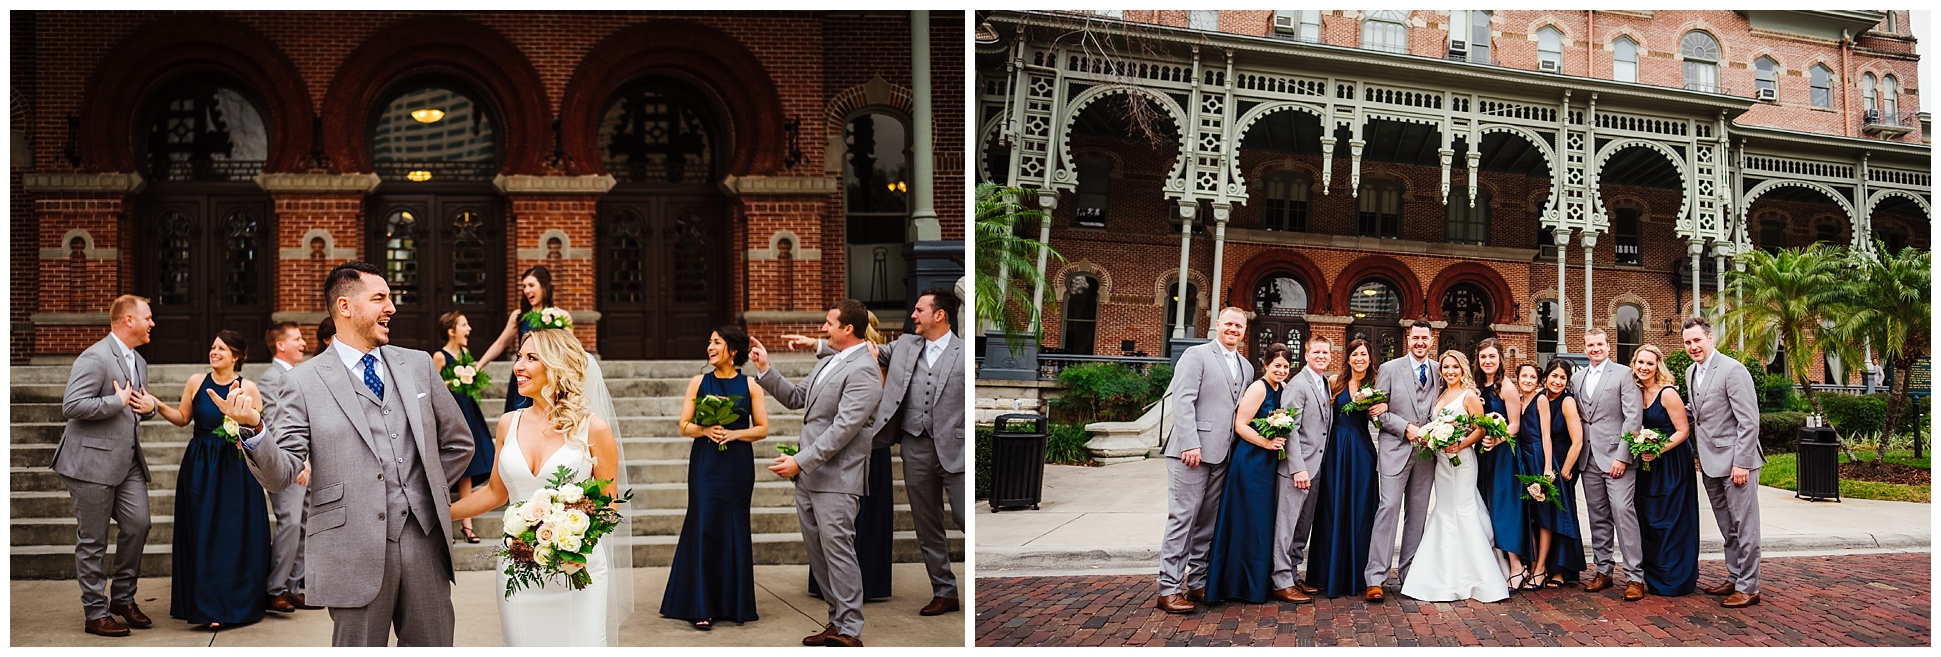 tampa-wedding-photographer-sacred-heart-armature-works-theater-riverfront_0031.jpg